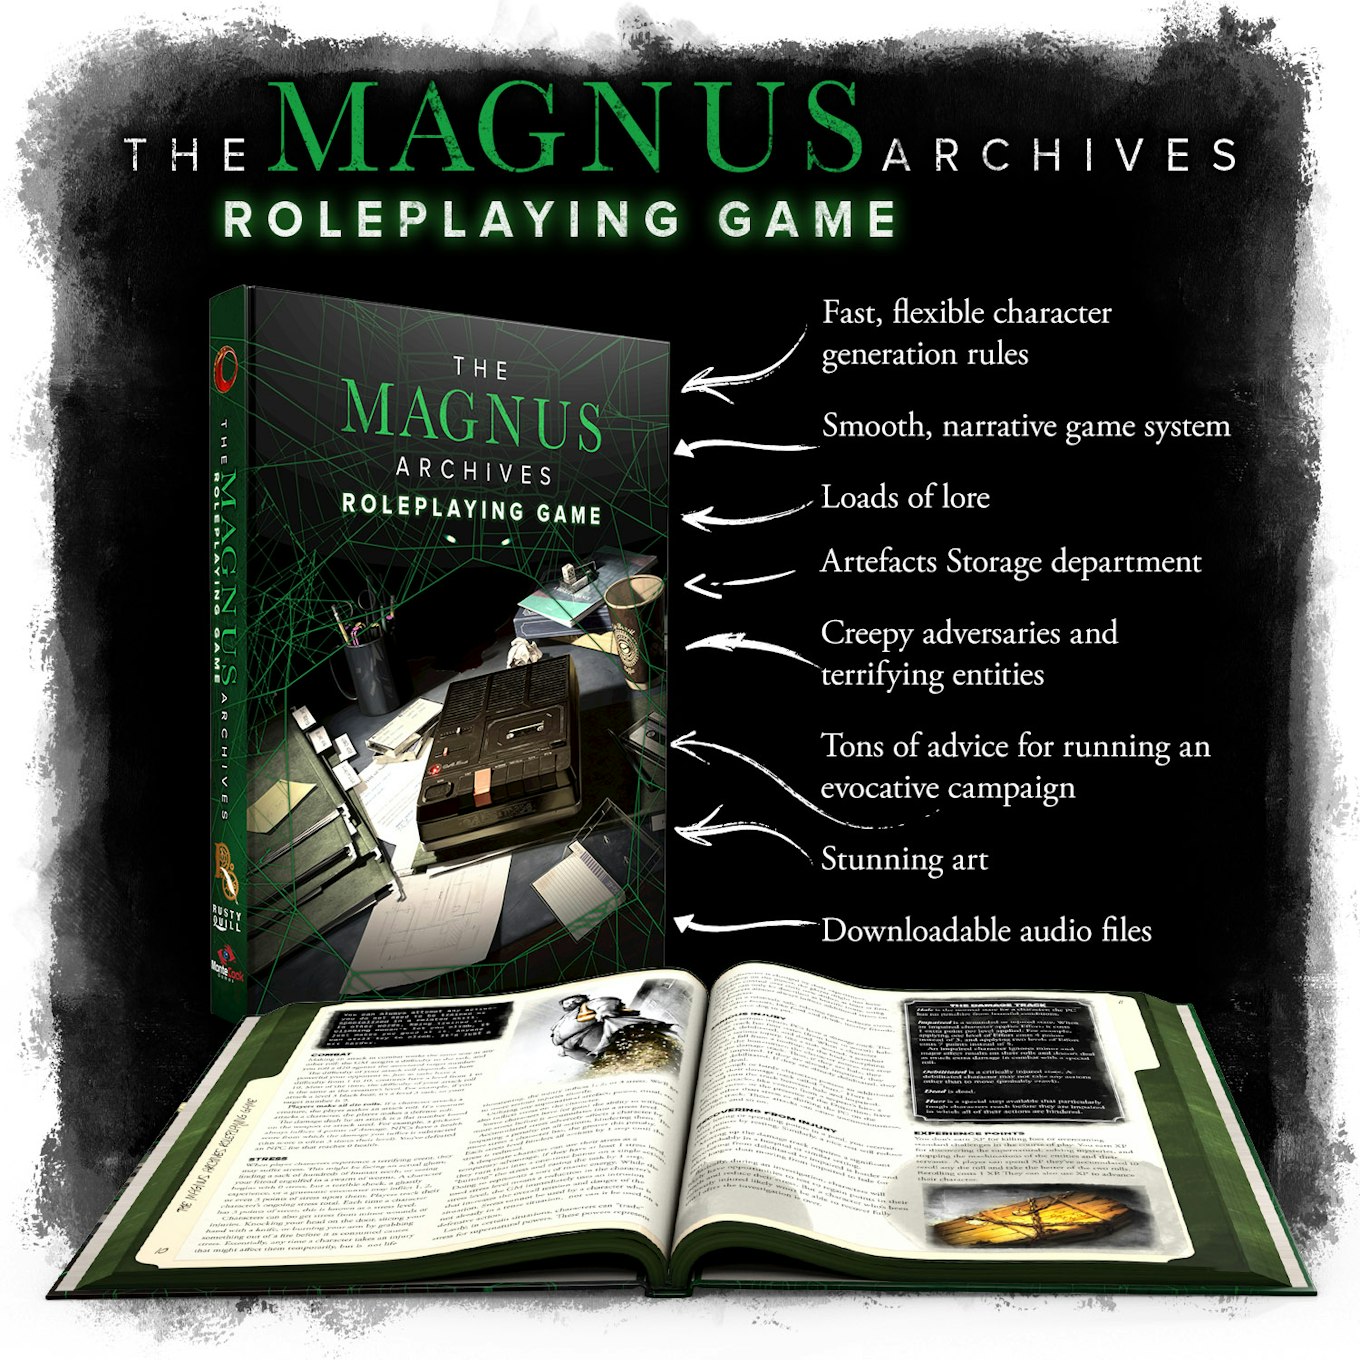 The Magnus Archives Roleplaying Game contains: fast, flexible character generation rules; smooth, narrative game system; loads of lore; Artefacts Storage department; creepy adversaries and terrifying entities; tons of advice for running an evocative campaign; stunning art; downloadable audio files.